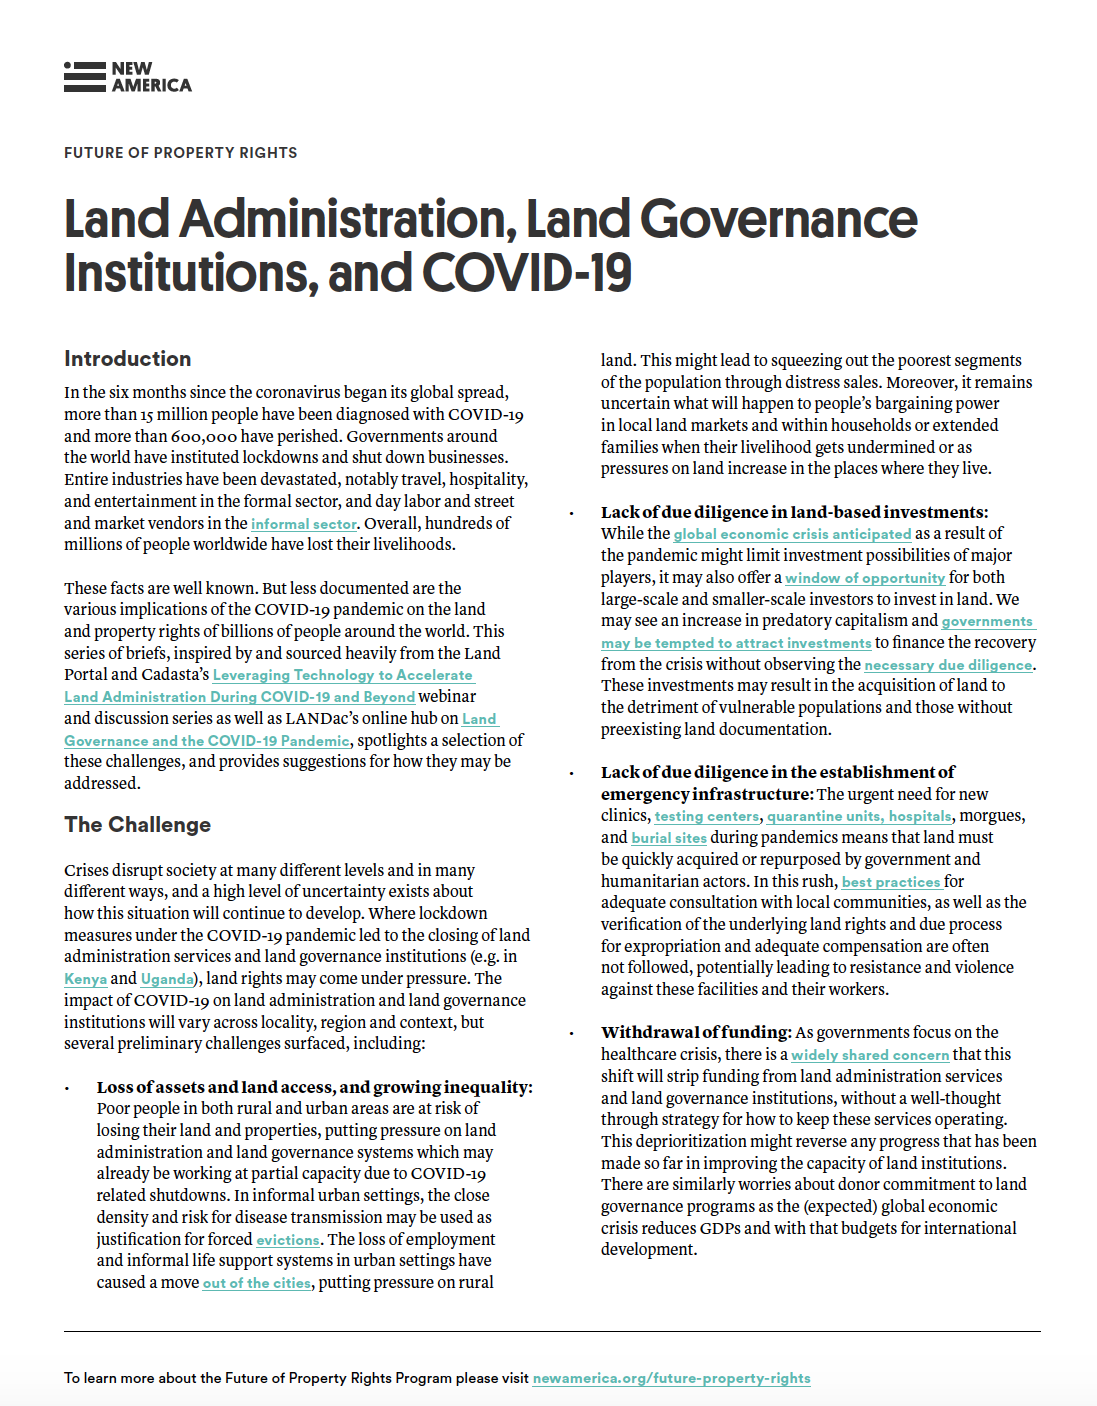 Land Administration, Land Governance Institutions, and COVID-19